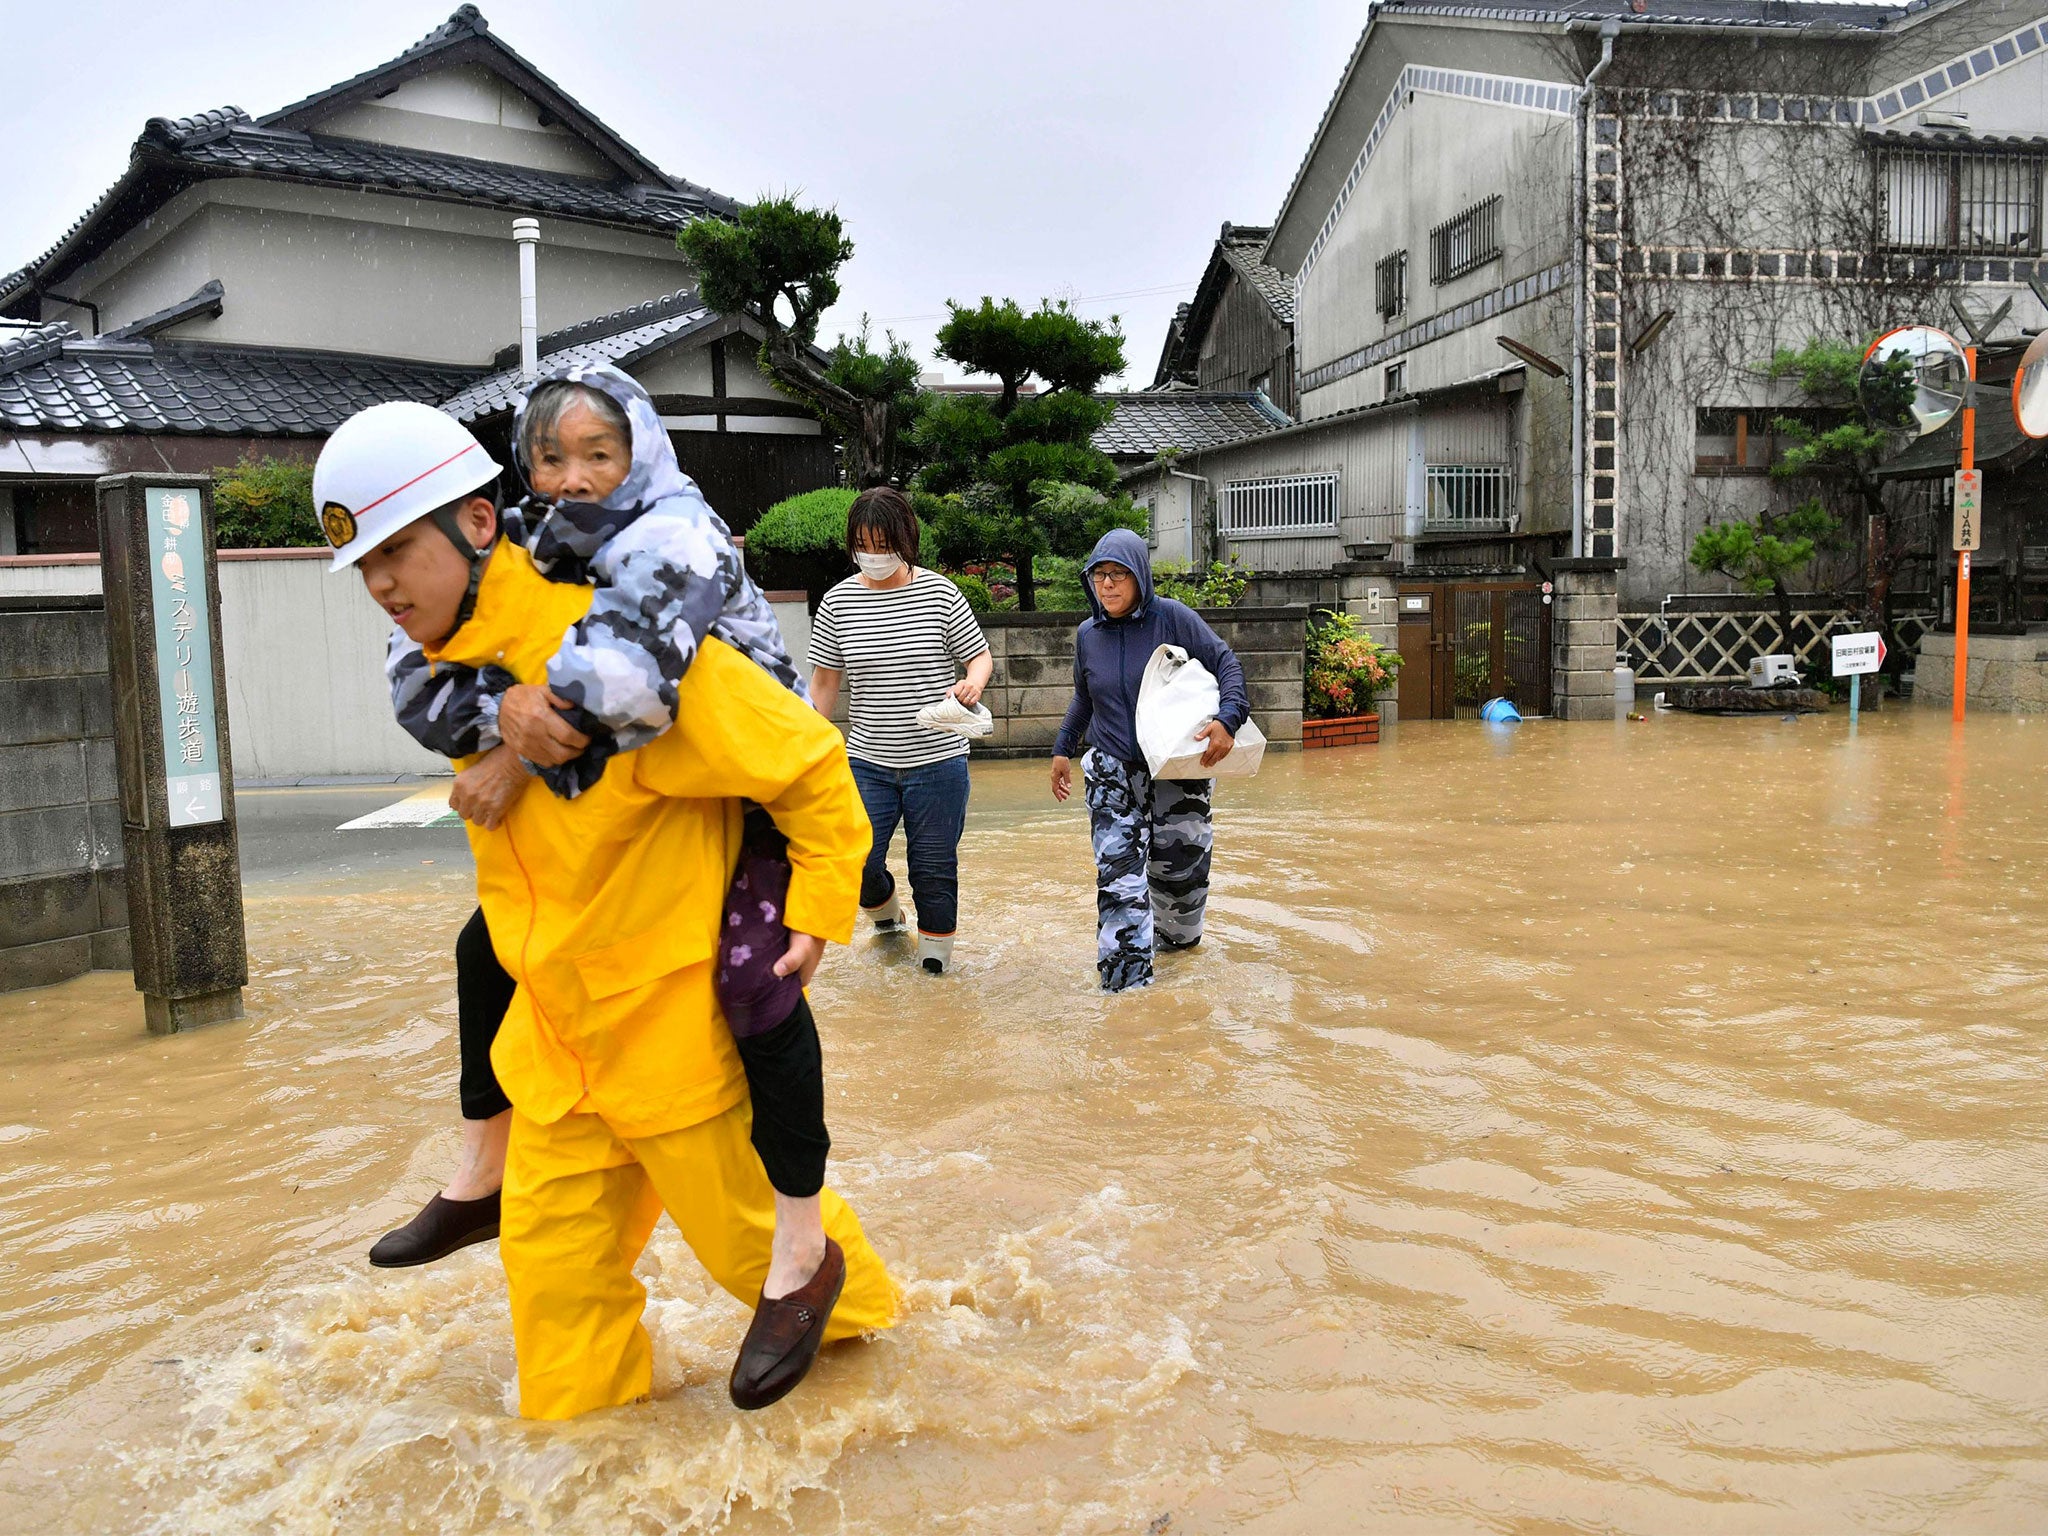 Japan floods Dozens dead and many missing as record rainfall sparks huge national rescue effort The Independent The Independent pic